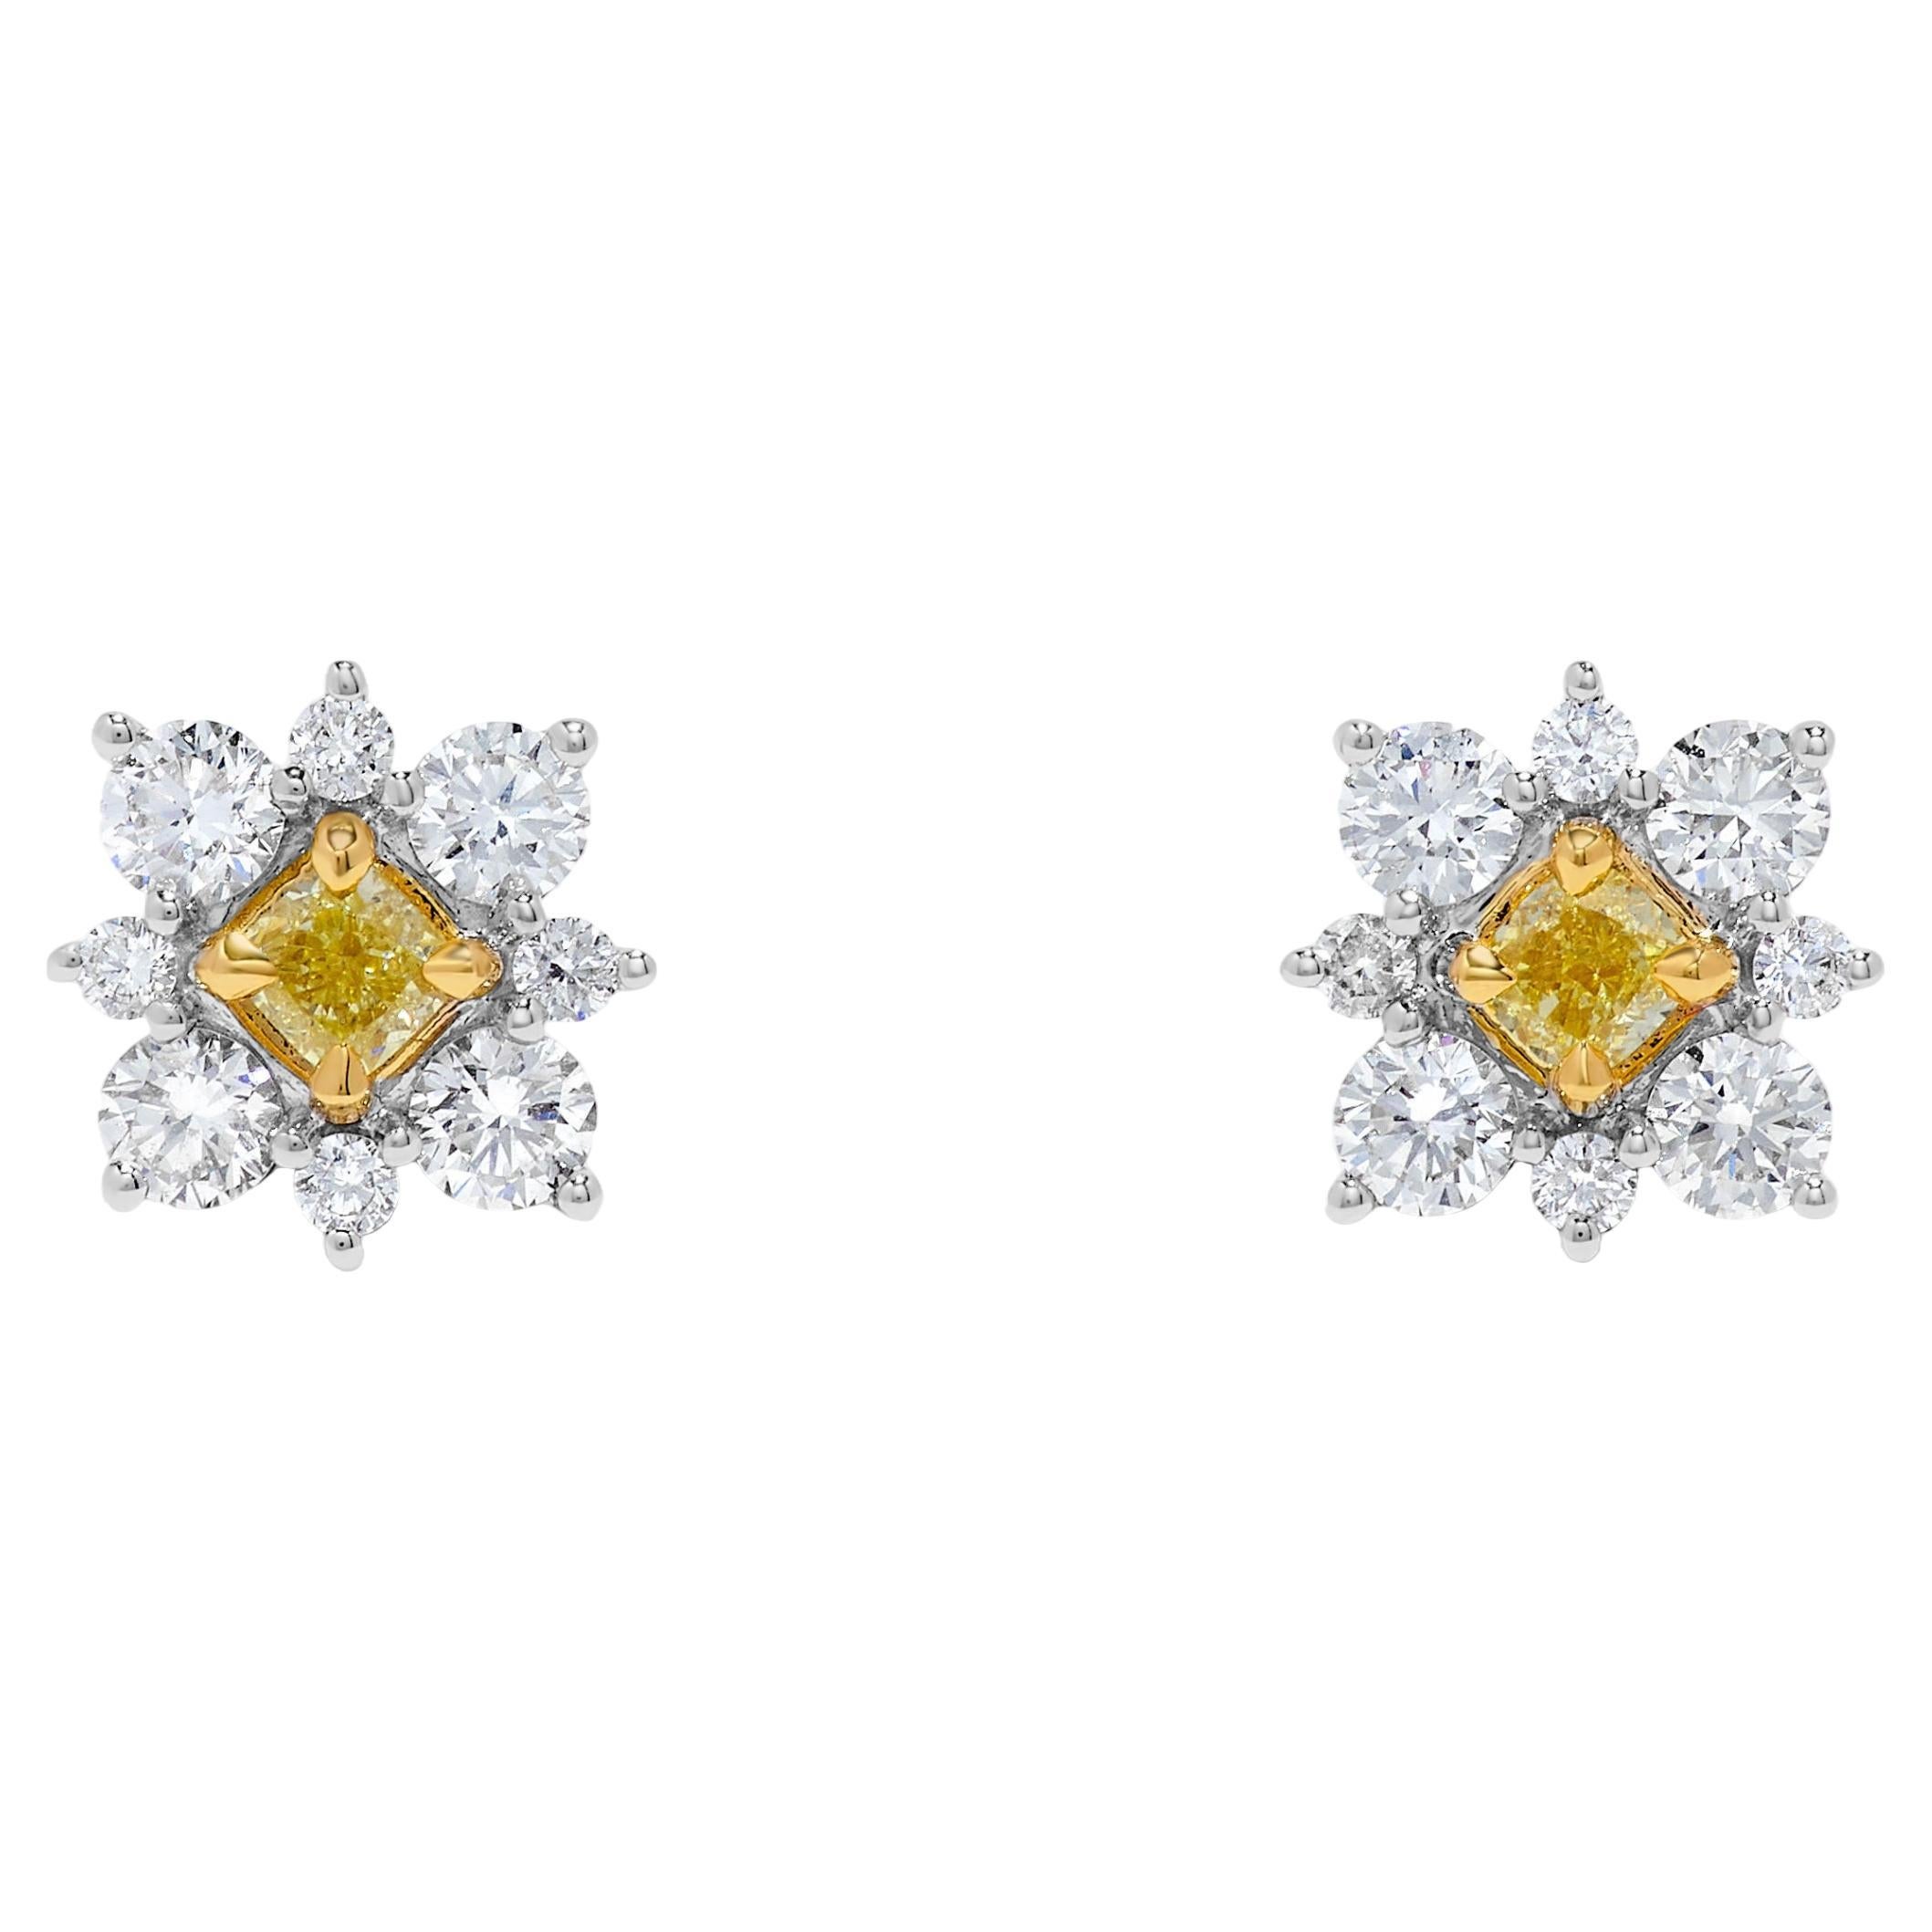 Natural Yellow Cushion and White Diamond 1.29 Carat TW Gold Stud Earrings For Sale